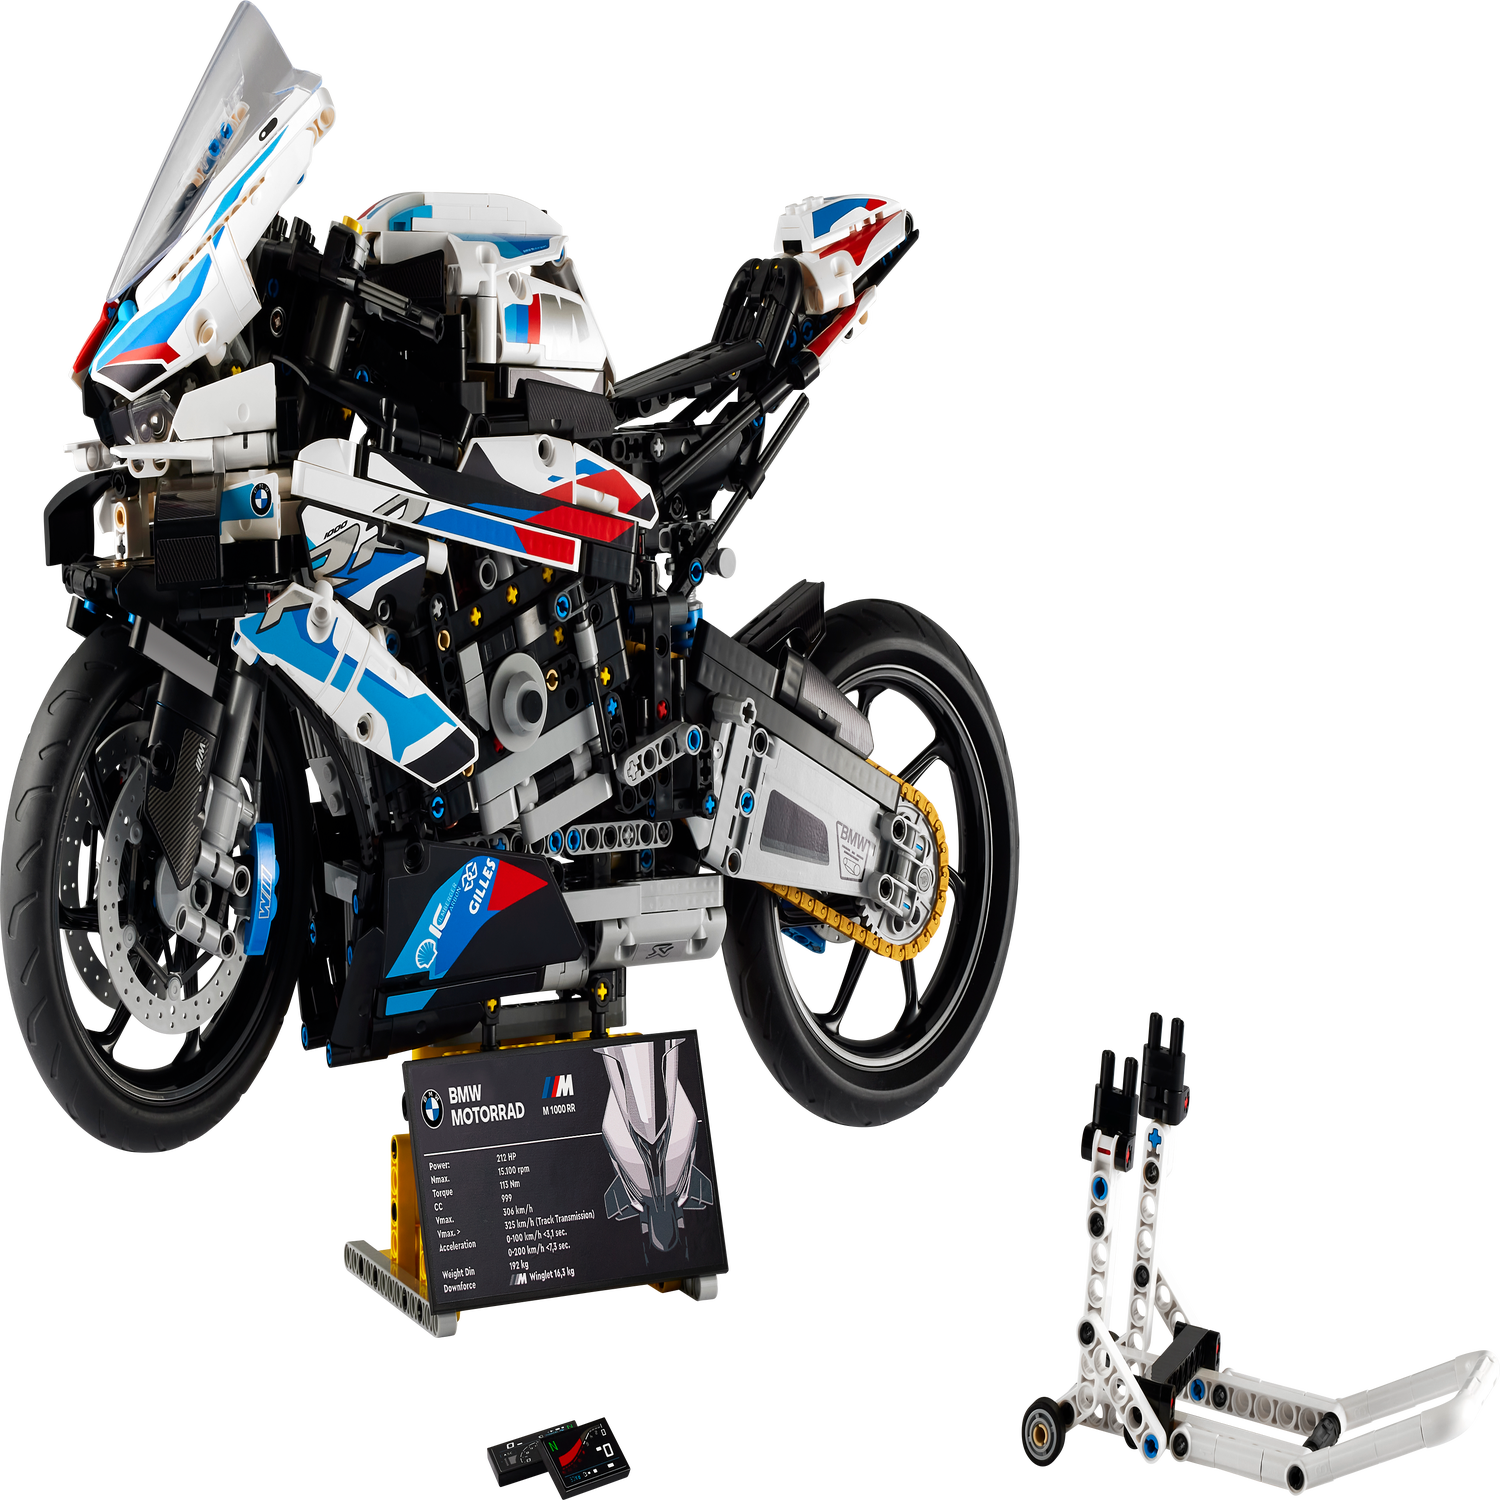 The motorcycle season sees an early January start with the LEGO